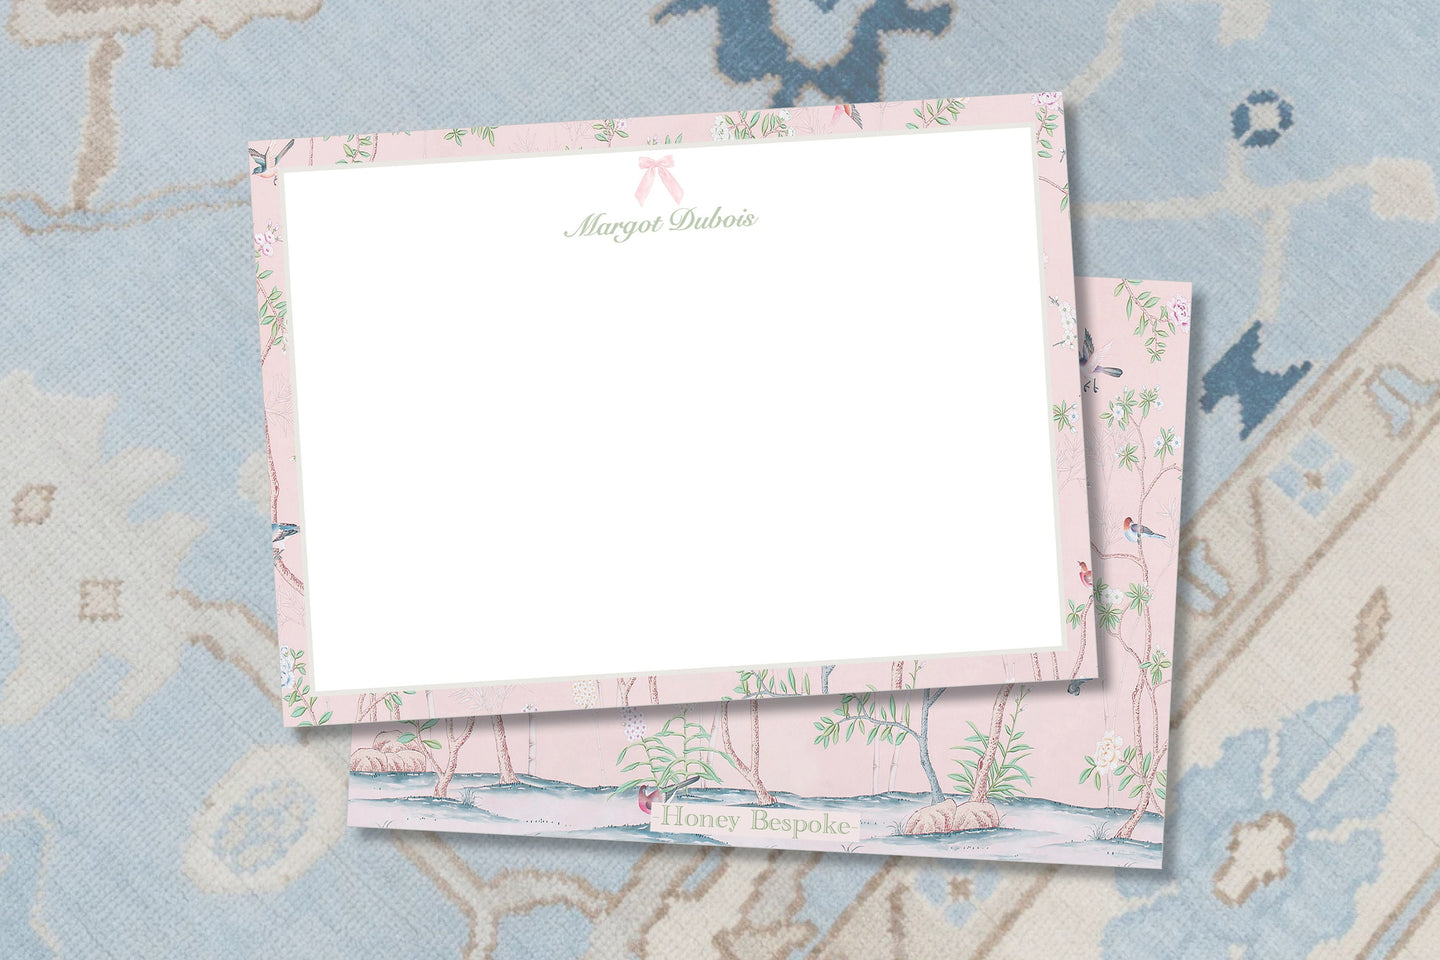 Elegant Womens Stationery / Teacher Gifts / One Of a Kind Hostess Gifts / Stationery For Her  / Preppy / Gifts for Her / Pretty Stationery